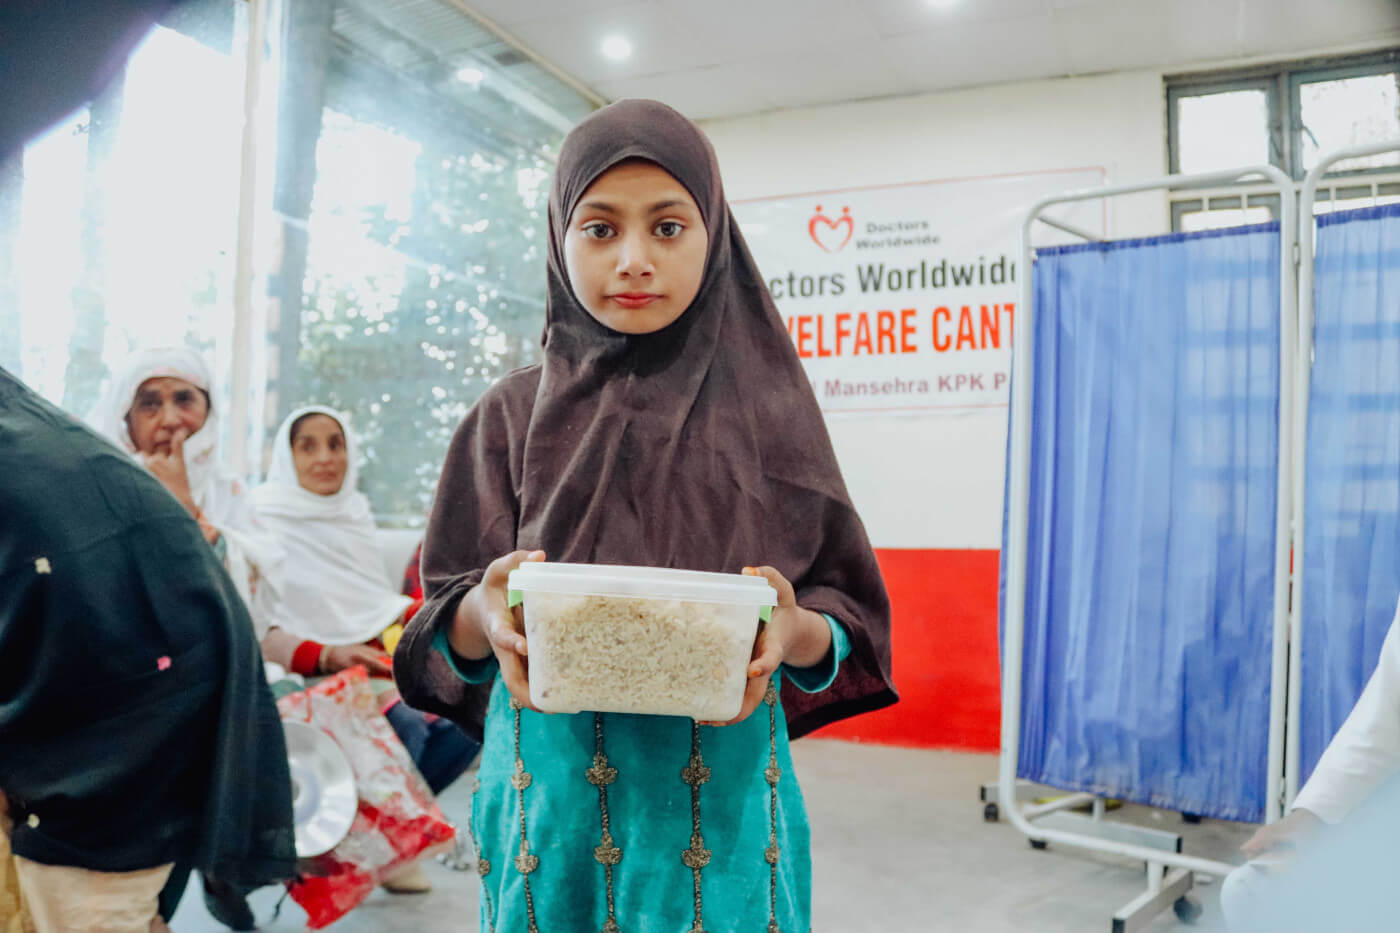 young girl holding food at doctors worldwide hospital canteen in pakistan